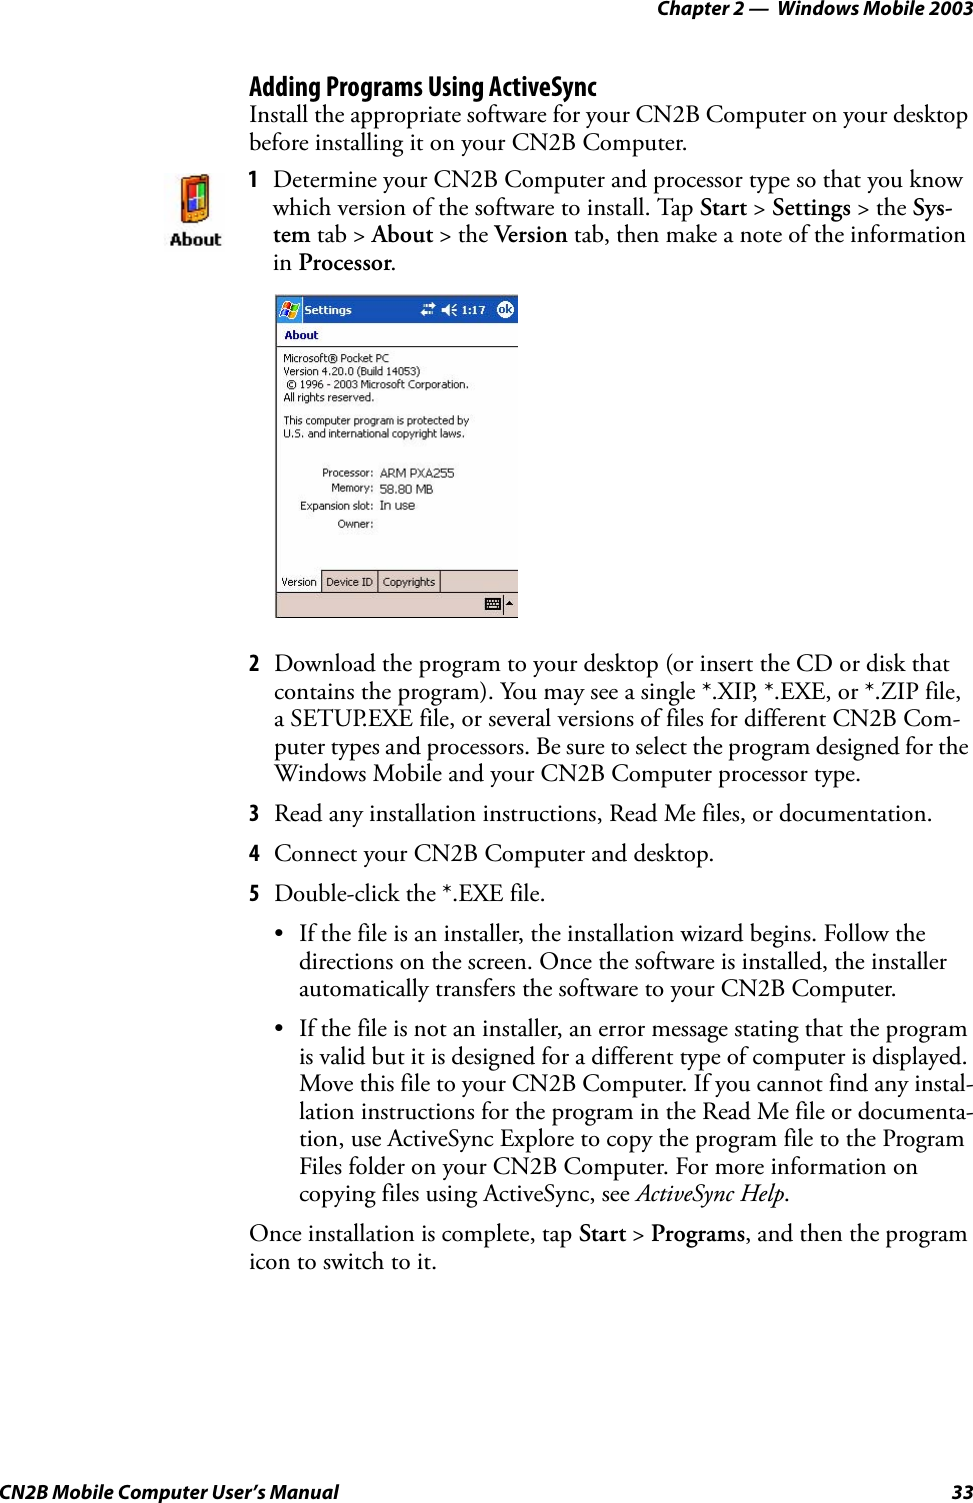 Chapter 2 —  Windows Mobile 2003CN2B Mobile Computer User’s Manual 33Adding Programs Using ActiveSyncInstall the appropriate software for your CN2B Computer on your desktop before installing it on your CN2B Computer.2Download the program to your desktop (or insert the CD or disk that contains the program). You may see a single *.XIP, *.EXE, or *.ZIP file, a SETUP.EXE file, or several versions of files for different CN2B Com-puter types and processors. Be sure to select the program designed for the Windows Mobile and your CN2B Computer processor type.3Read any installation instructions, Read Me files, or documentation.4Connect your CN2B Computer and desktop.5Double-click the *.EXE file.• If the file is an installer, the installation wizard begins. Follow the directions on the screen. Once the software is installed, the installer automatically transfers the software to your CN2B Computer.• If the file is not an installer, an error message stating that the program is valid but it is designed for a different type of computer is displayed. Move this file to your CN2B Computer. If you cannot find any instal-lation instructions for the program in the Read Me file or documenta-tion, use ActiveSync Explore to copy the program file to the Program Files folder on your CN2B Computer. For more information on copying files using ActiveSync, see ActiveSync Help.Once installation is complete, tap Start &gt; Programs, and then the program icon to switch to it.1Determine your CN2B Computer and processor type so that you know which version of the software to install. Tap Start &gt; Settings &gt; the Sys-tem tab &gt; About &gt; the Version tab, then make a note of the information in Processor.